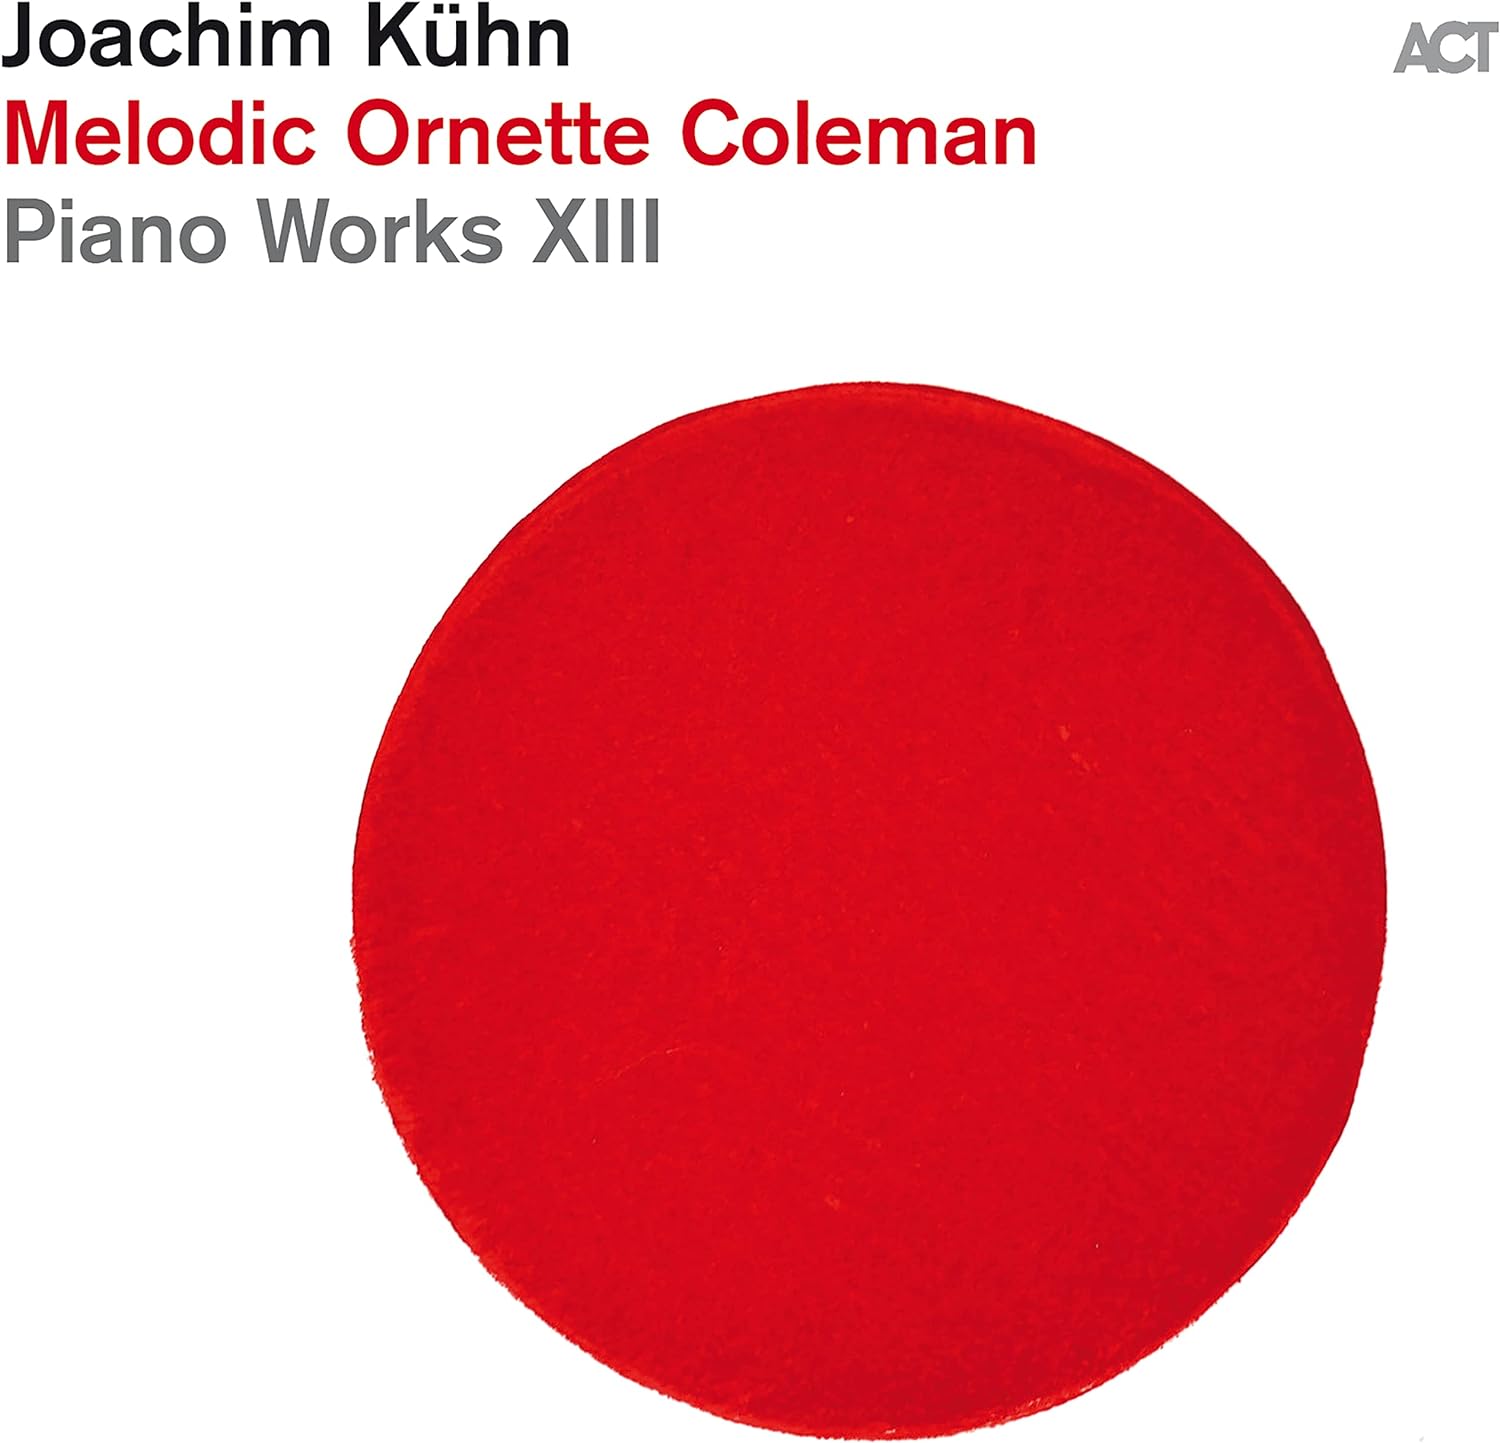 Melodic Ornette Coleman: Piano Works XIII | Joachim Kuhn